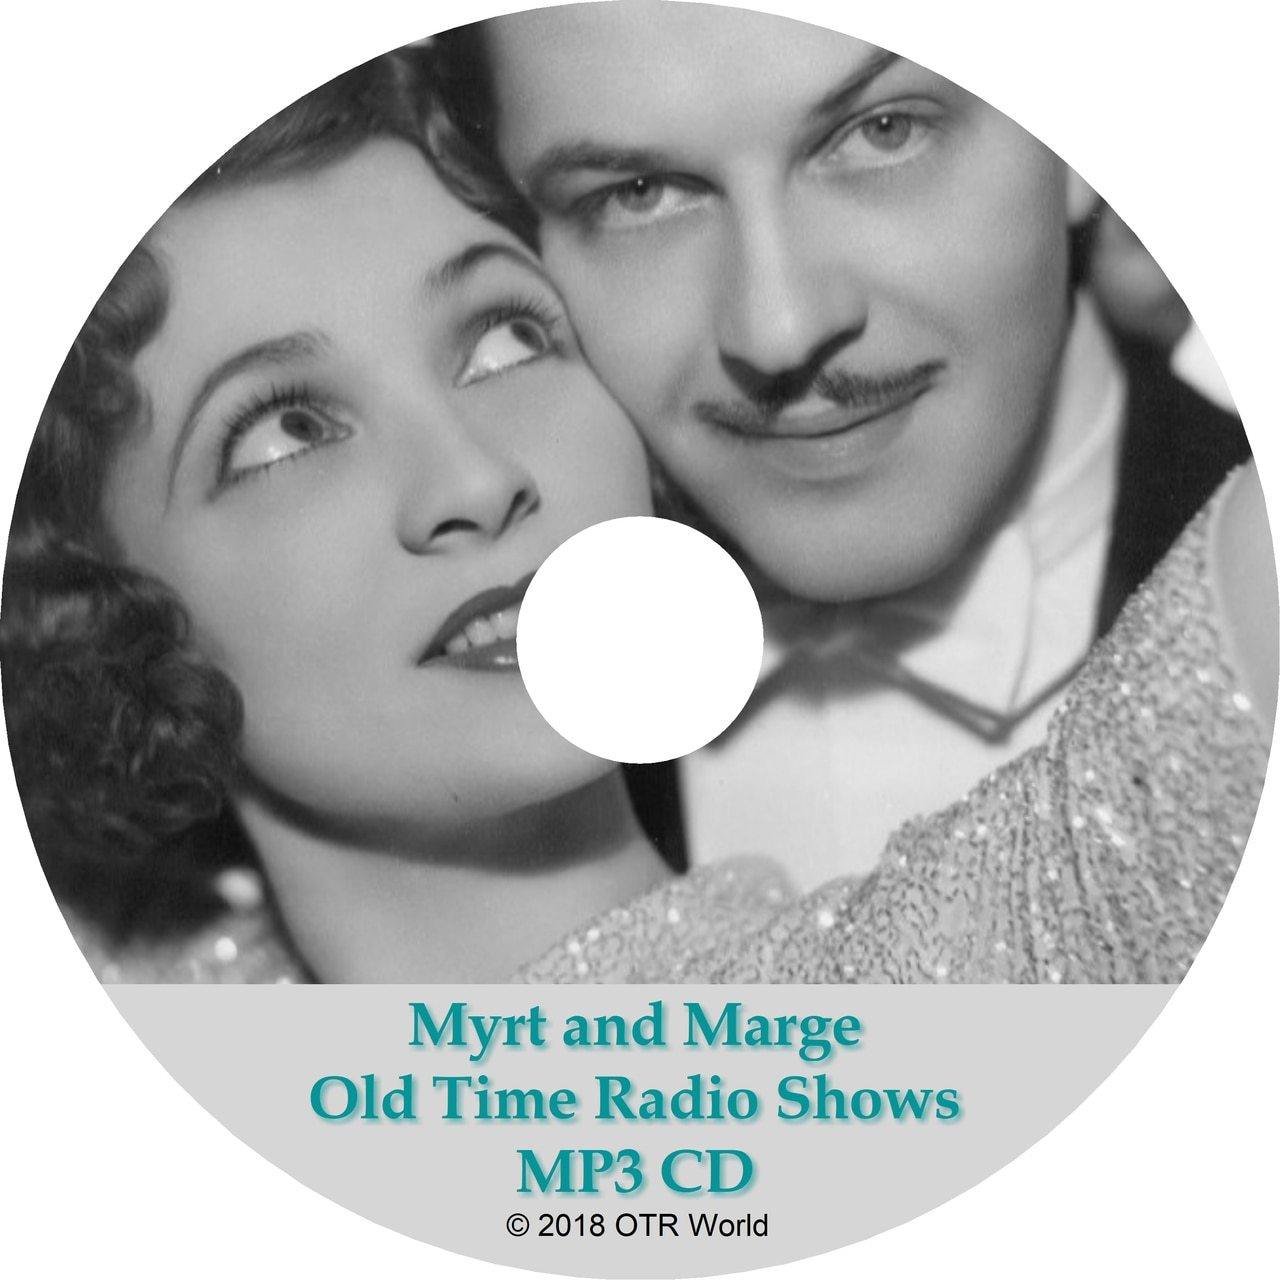 Myrt and Marge Old Time Radio Shows 112 Episodes On MP3 CD - OTR World